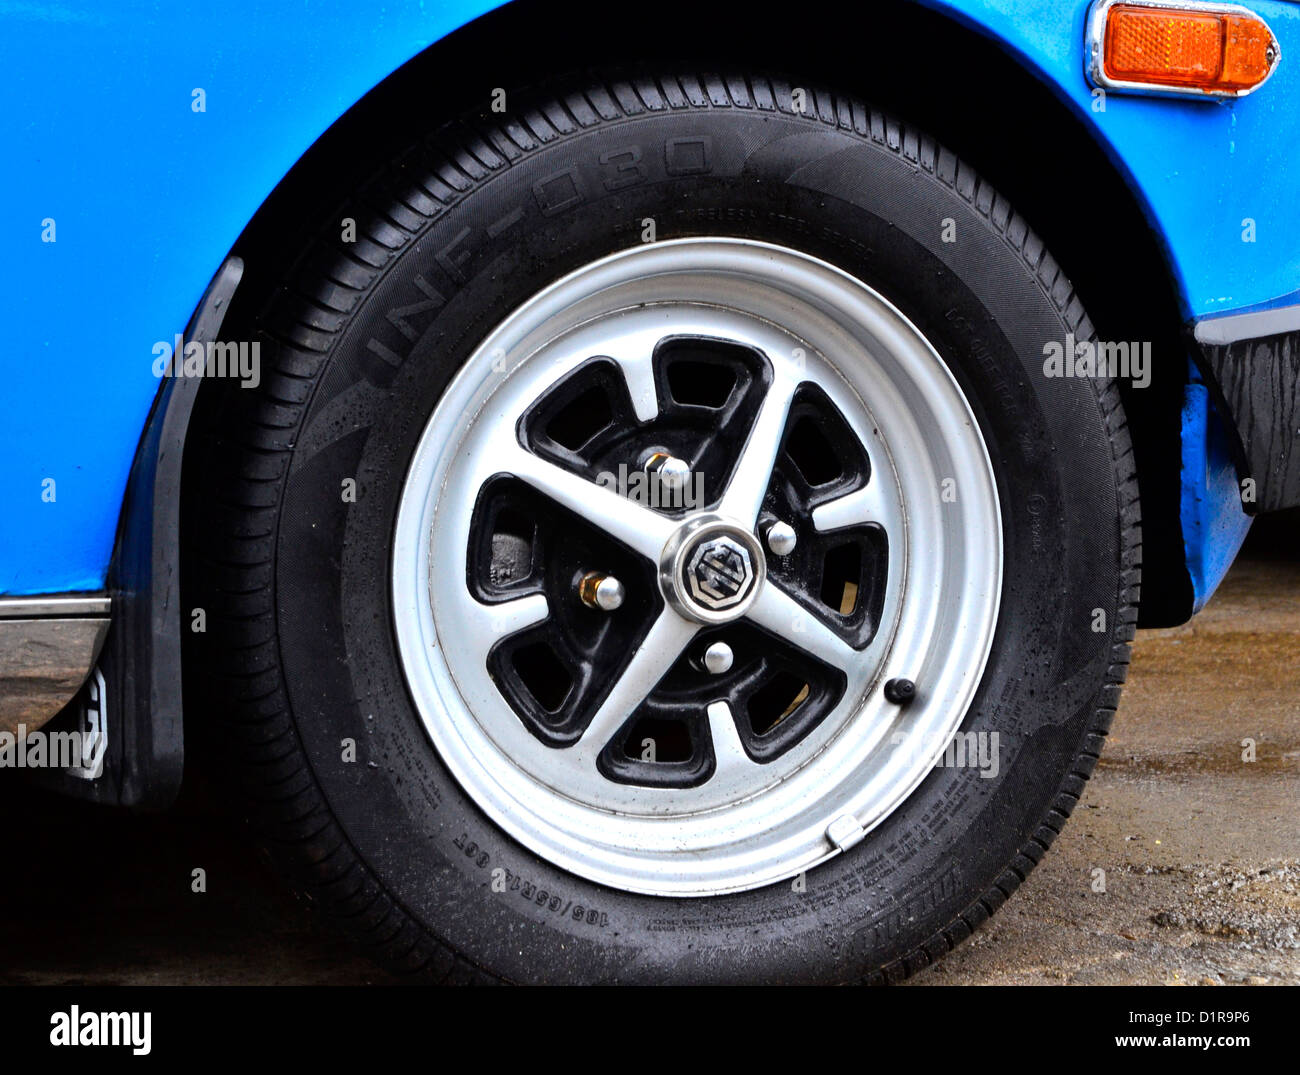 Rostyle Wheel on a MG Midget sports car from the 1970s Stock Photo